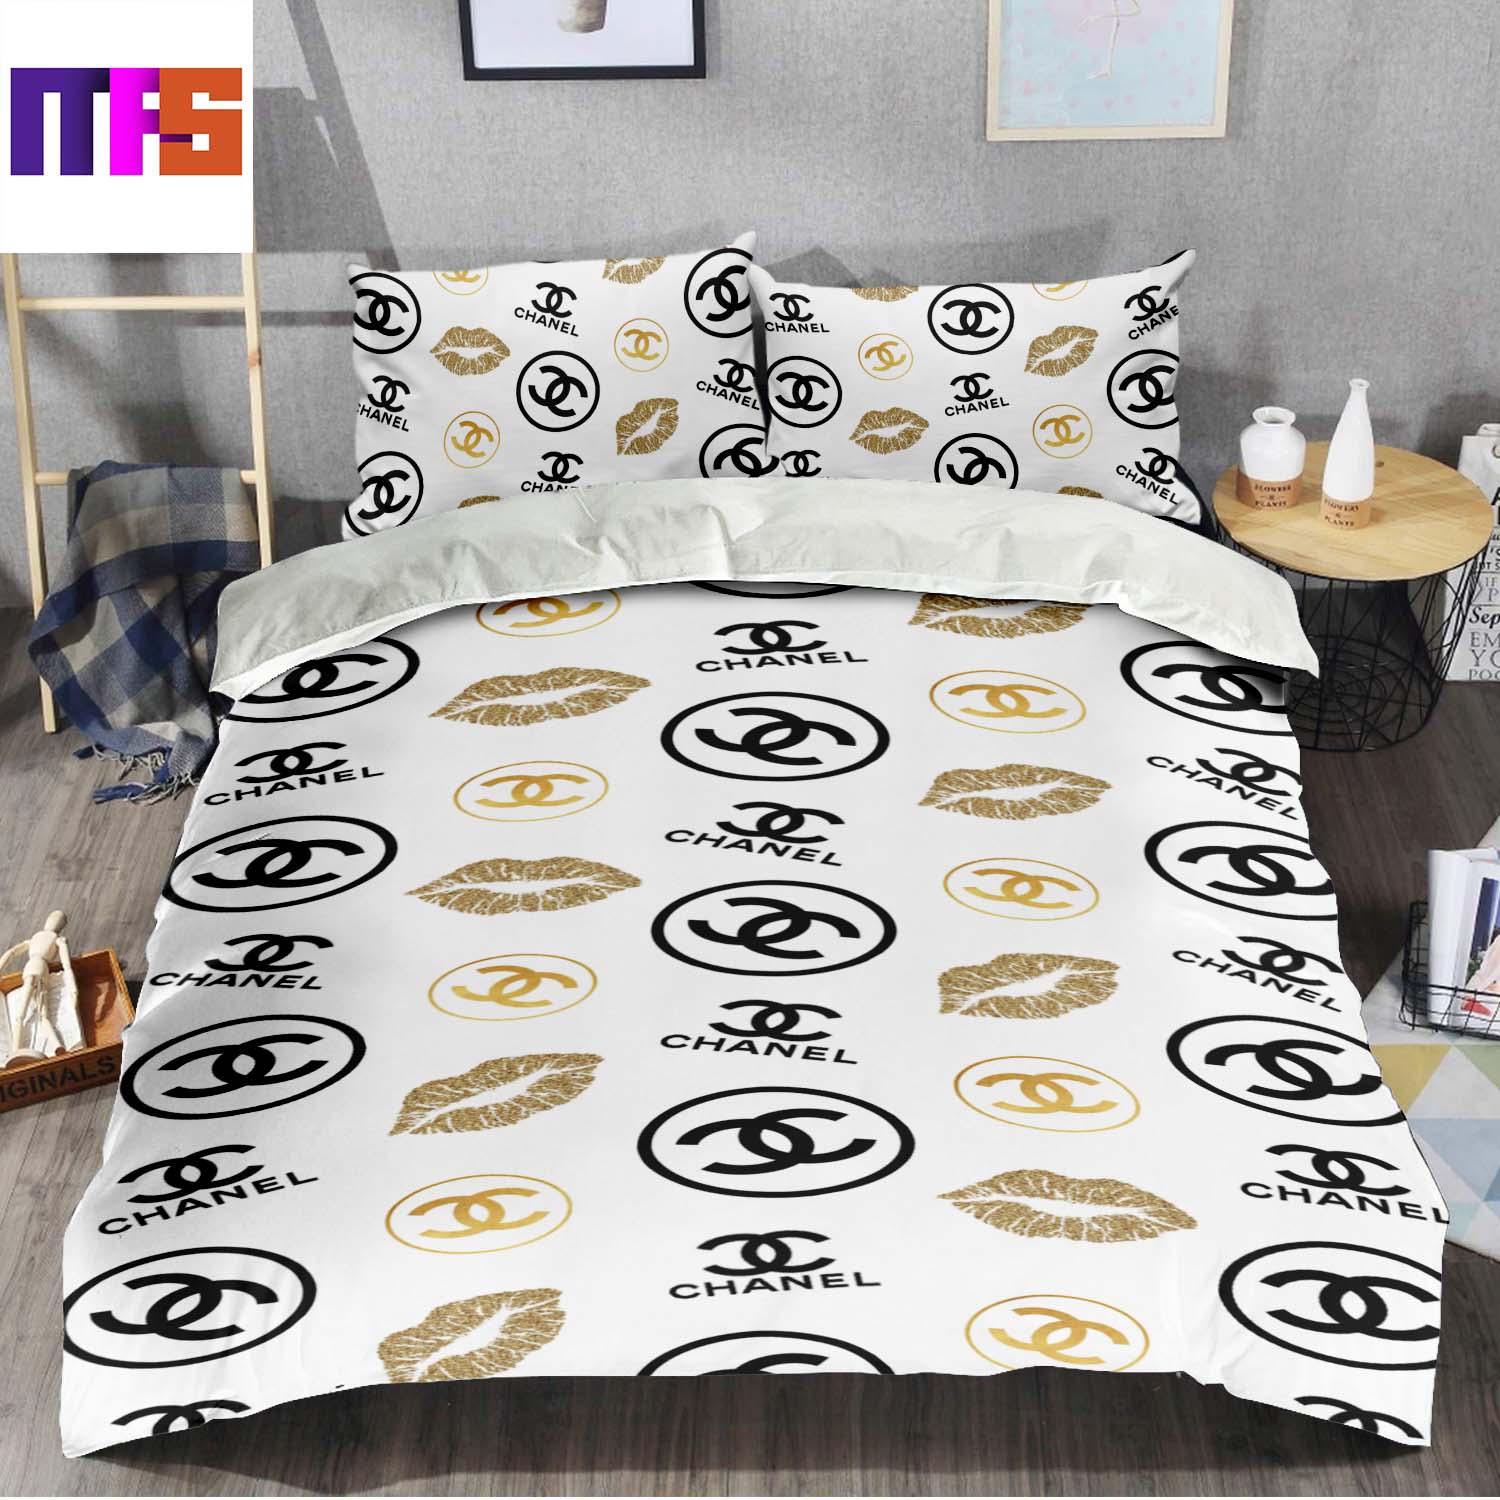 Chanel Bedding Sets Chanel White Bedding Sets Quilt Sets Duvet Cover Home  Decor  Muranotex Store